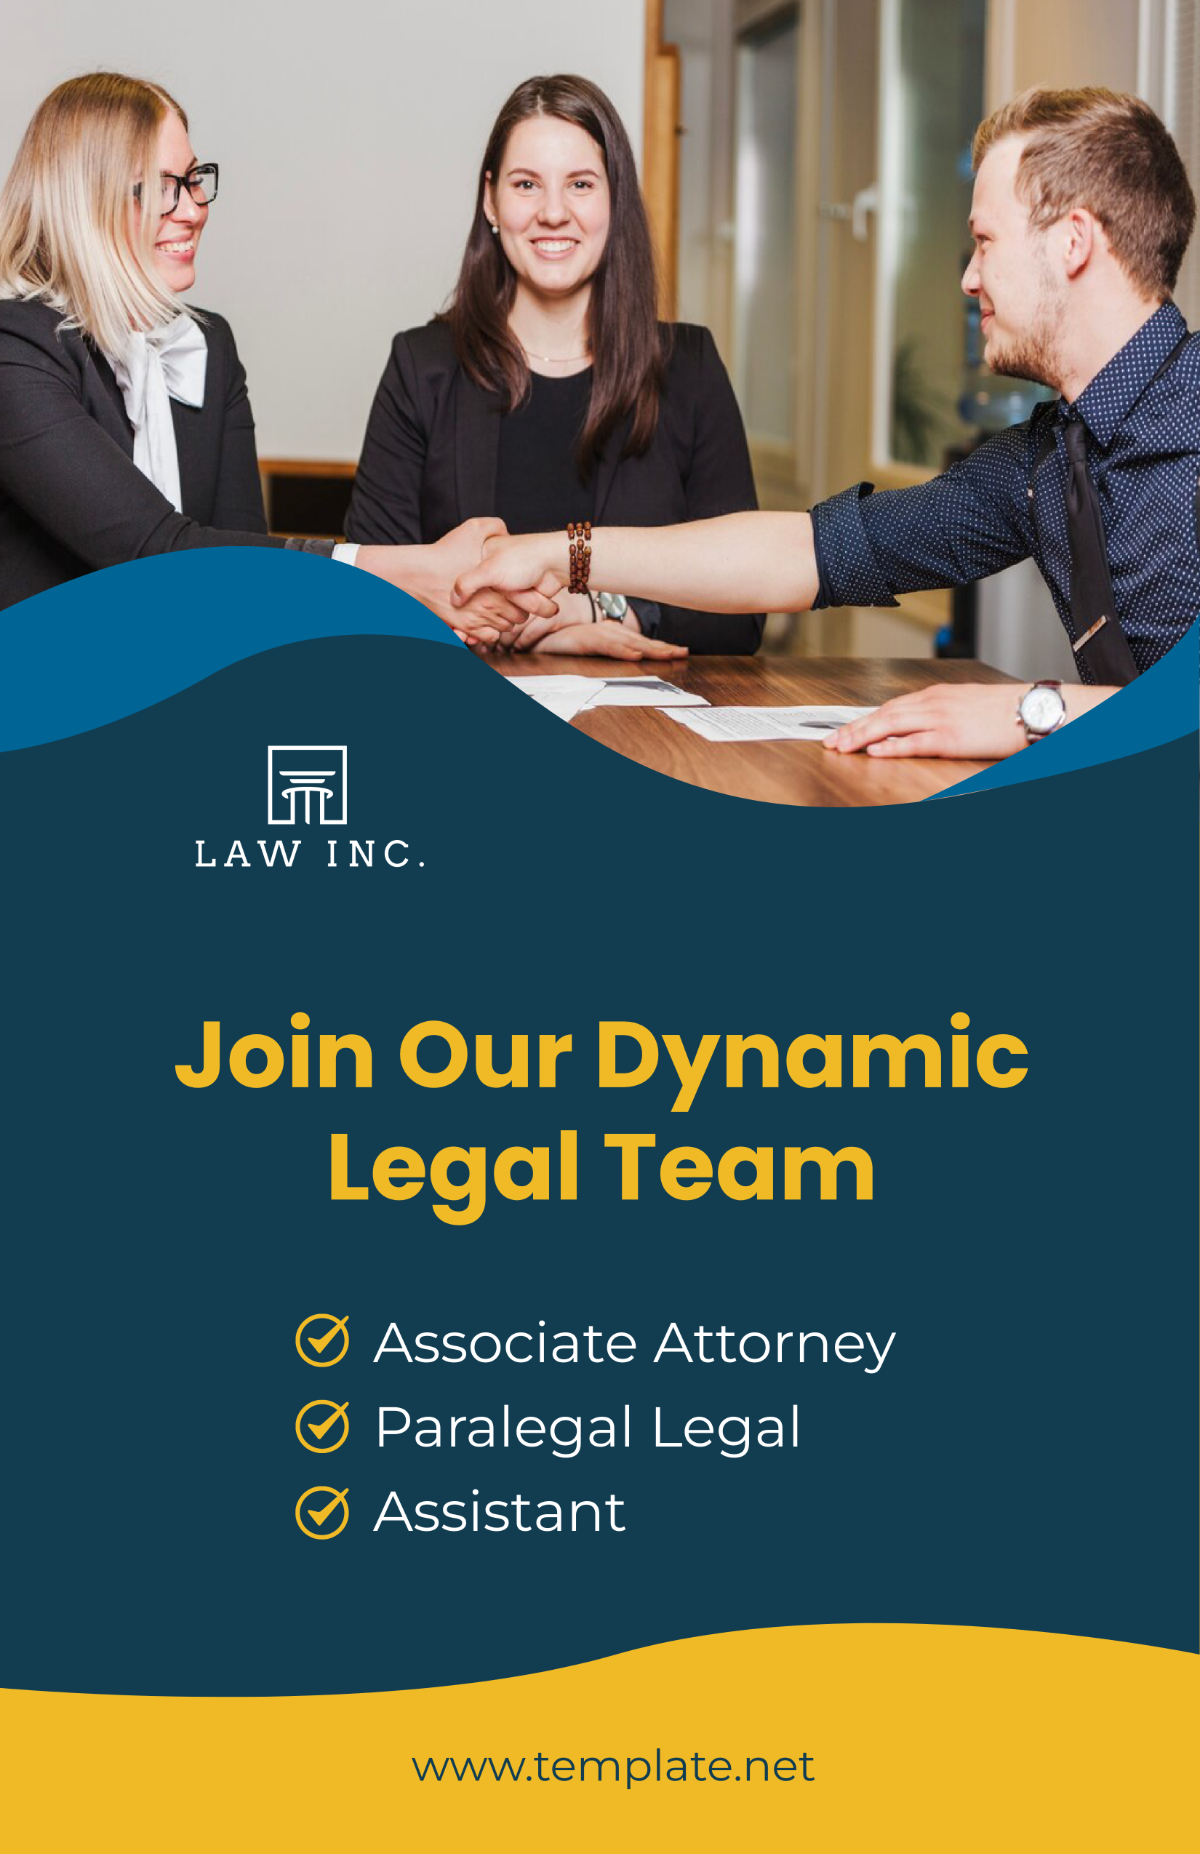 Law Firm Recruitment Poster